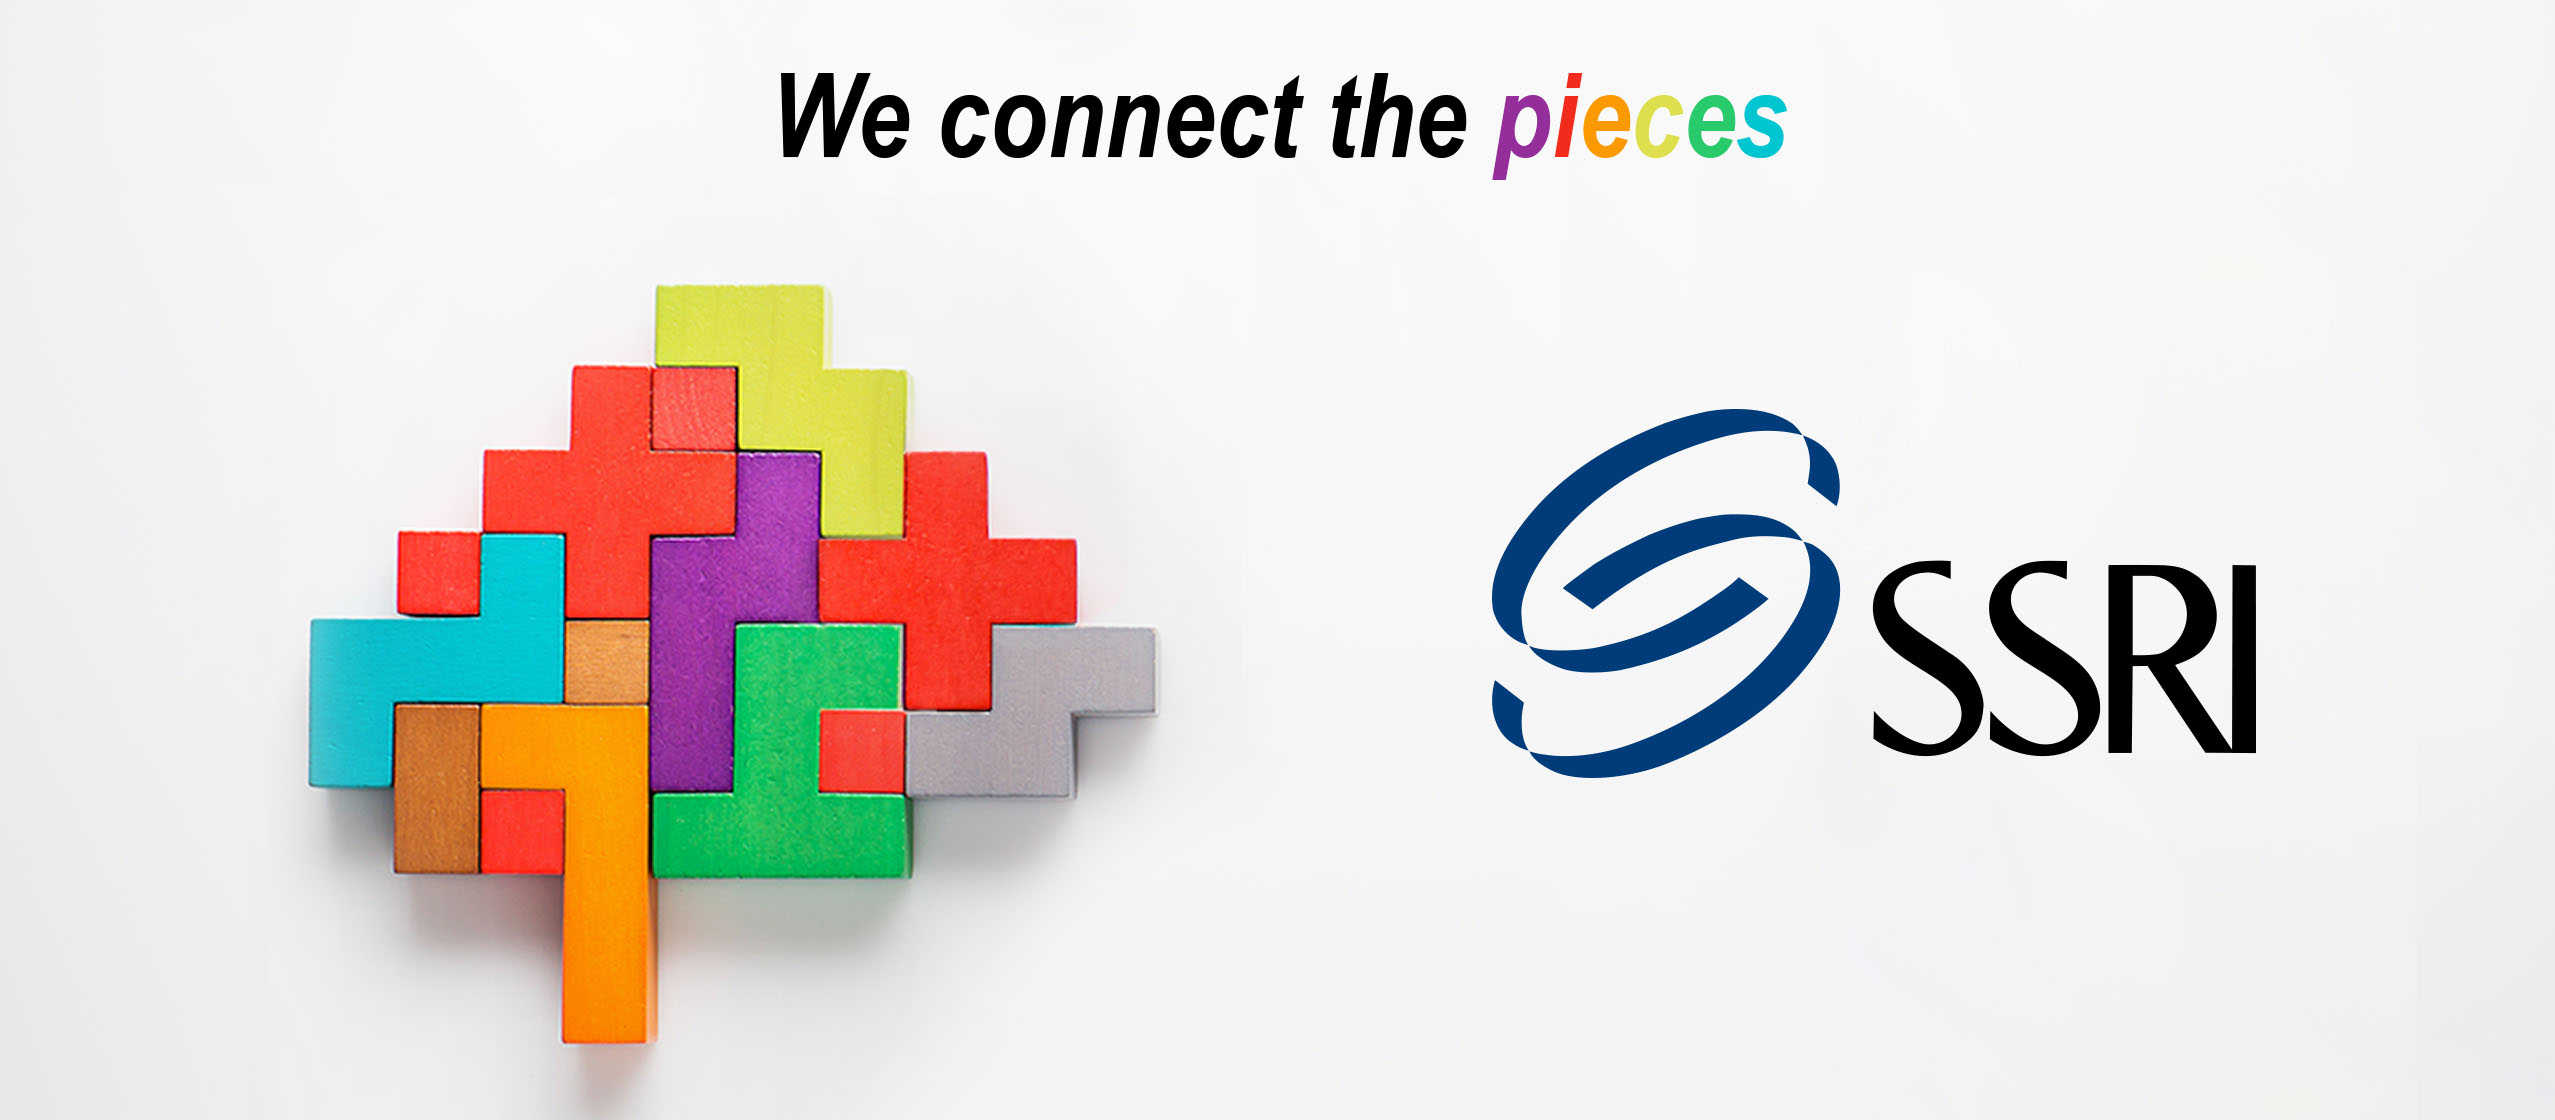 We connect the pieces